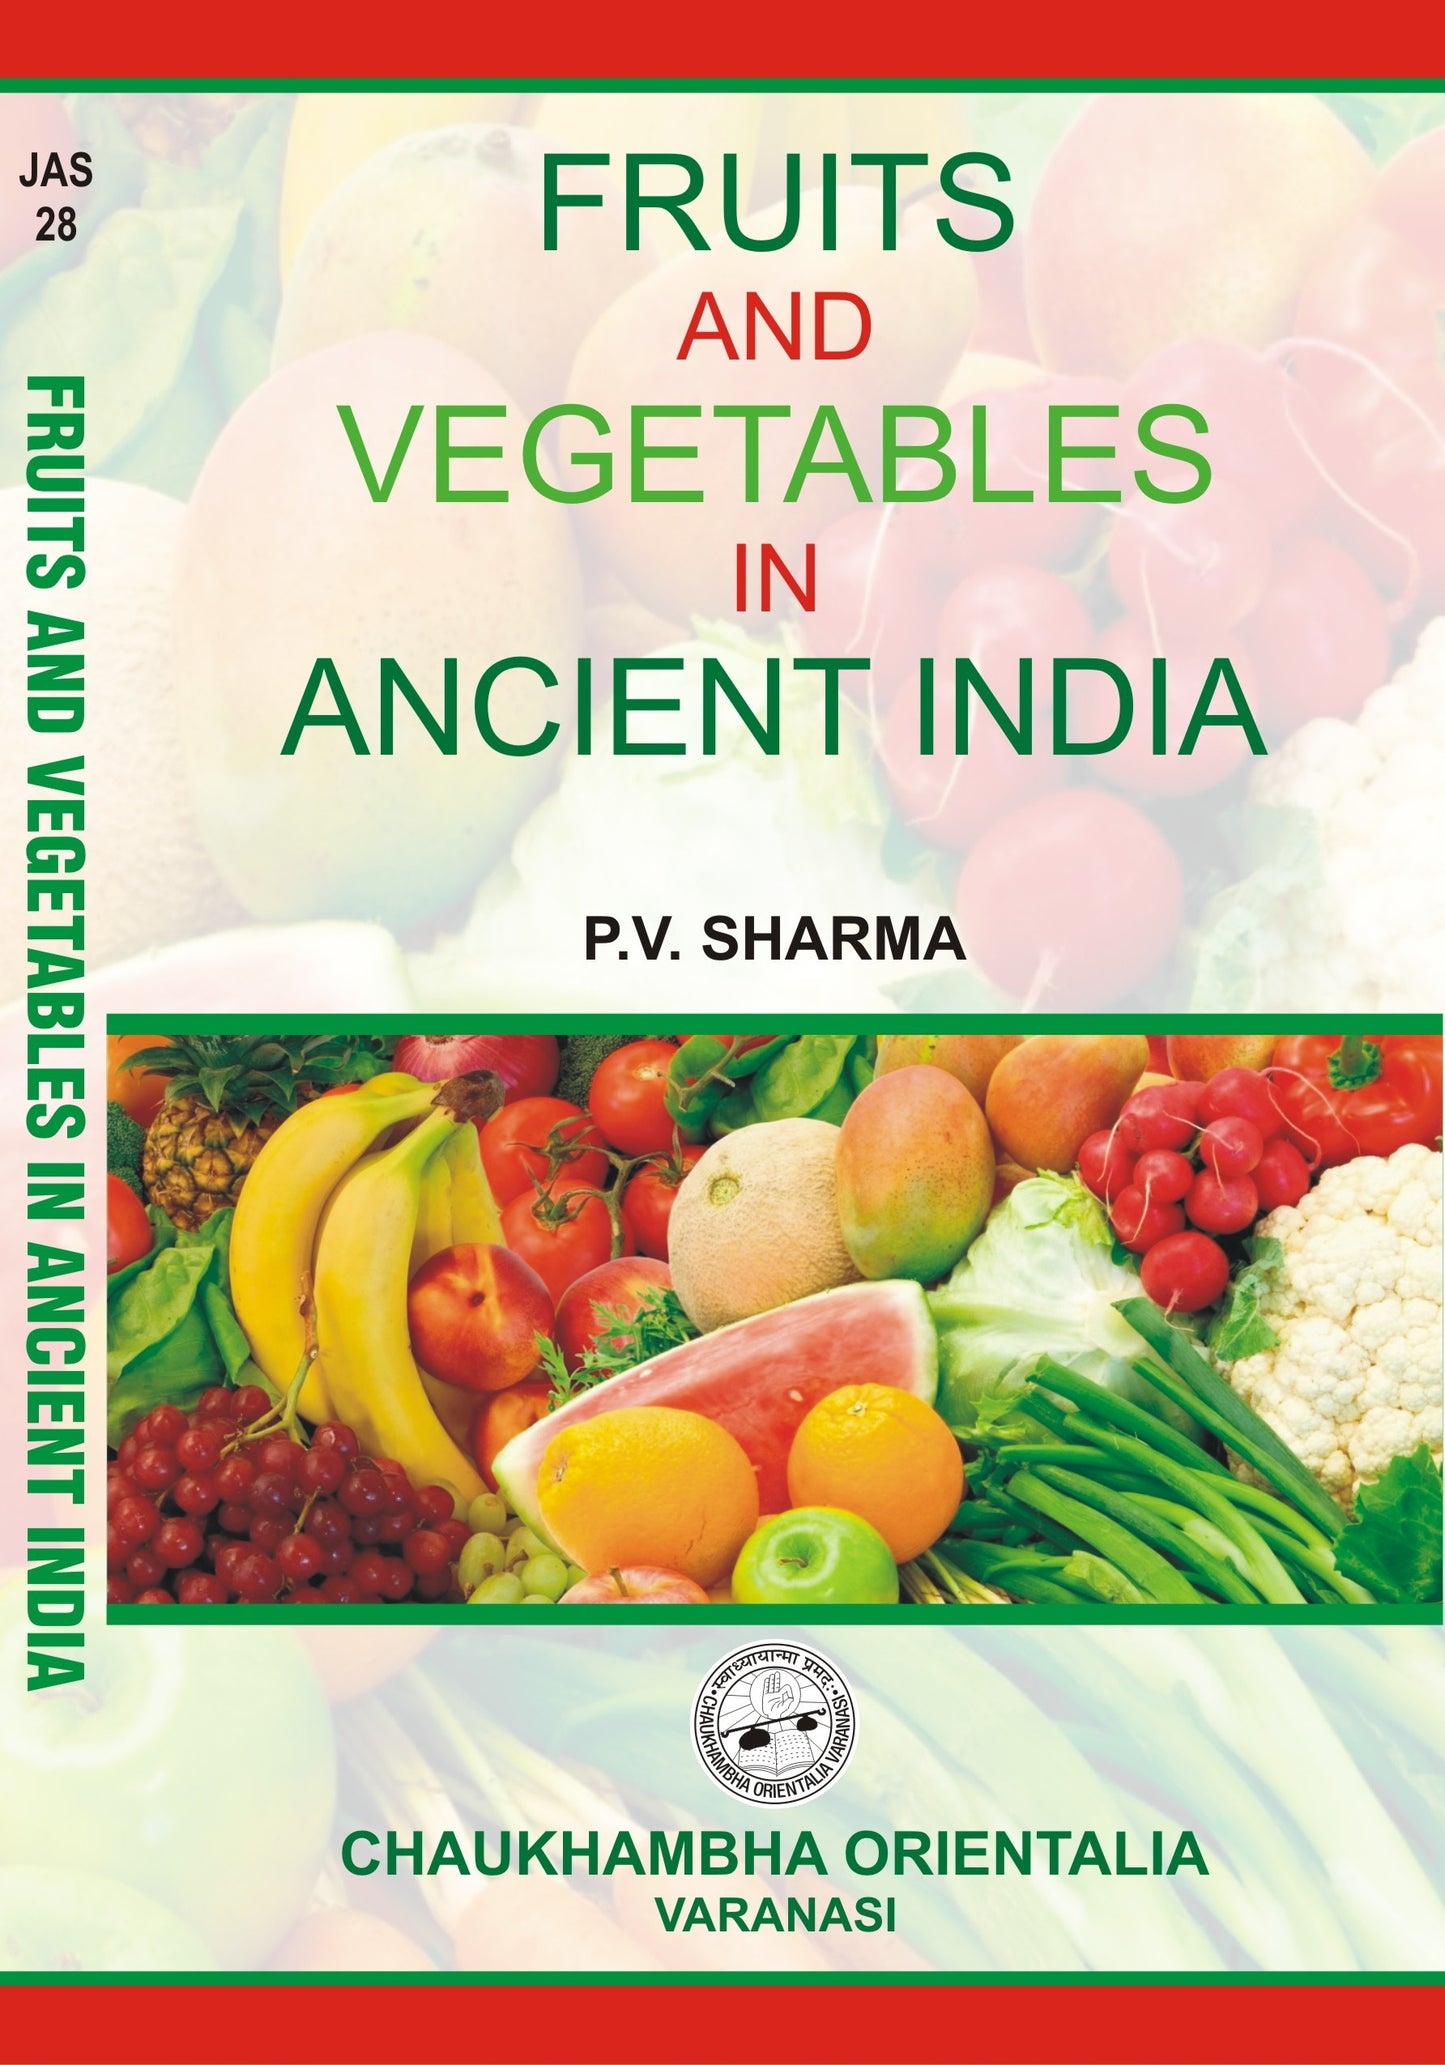 Chaukhambha Orientalia Fruits and Vegetables in Ancient India